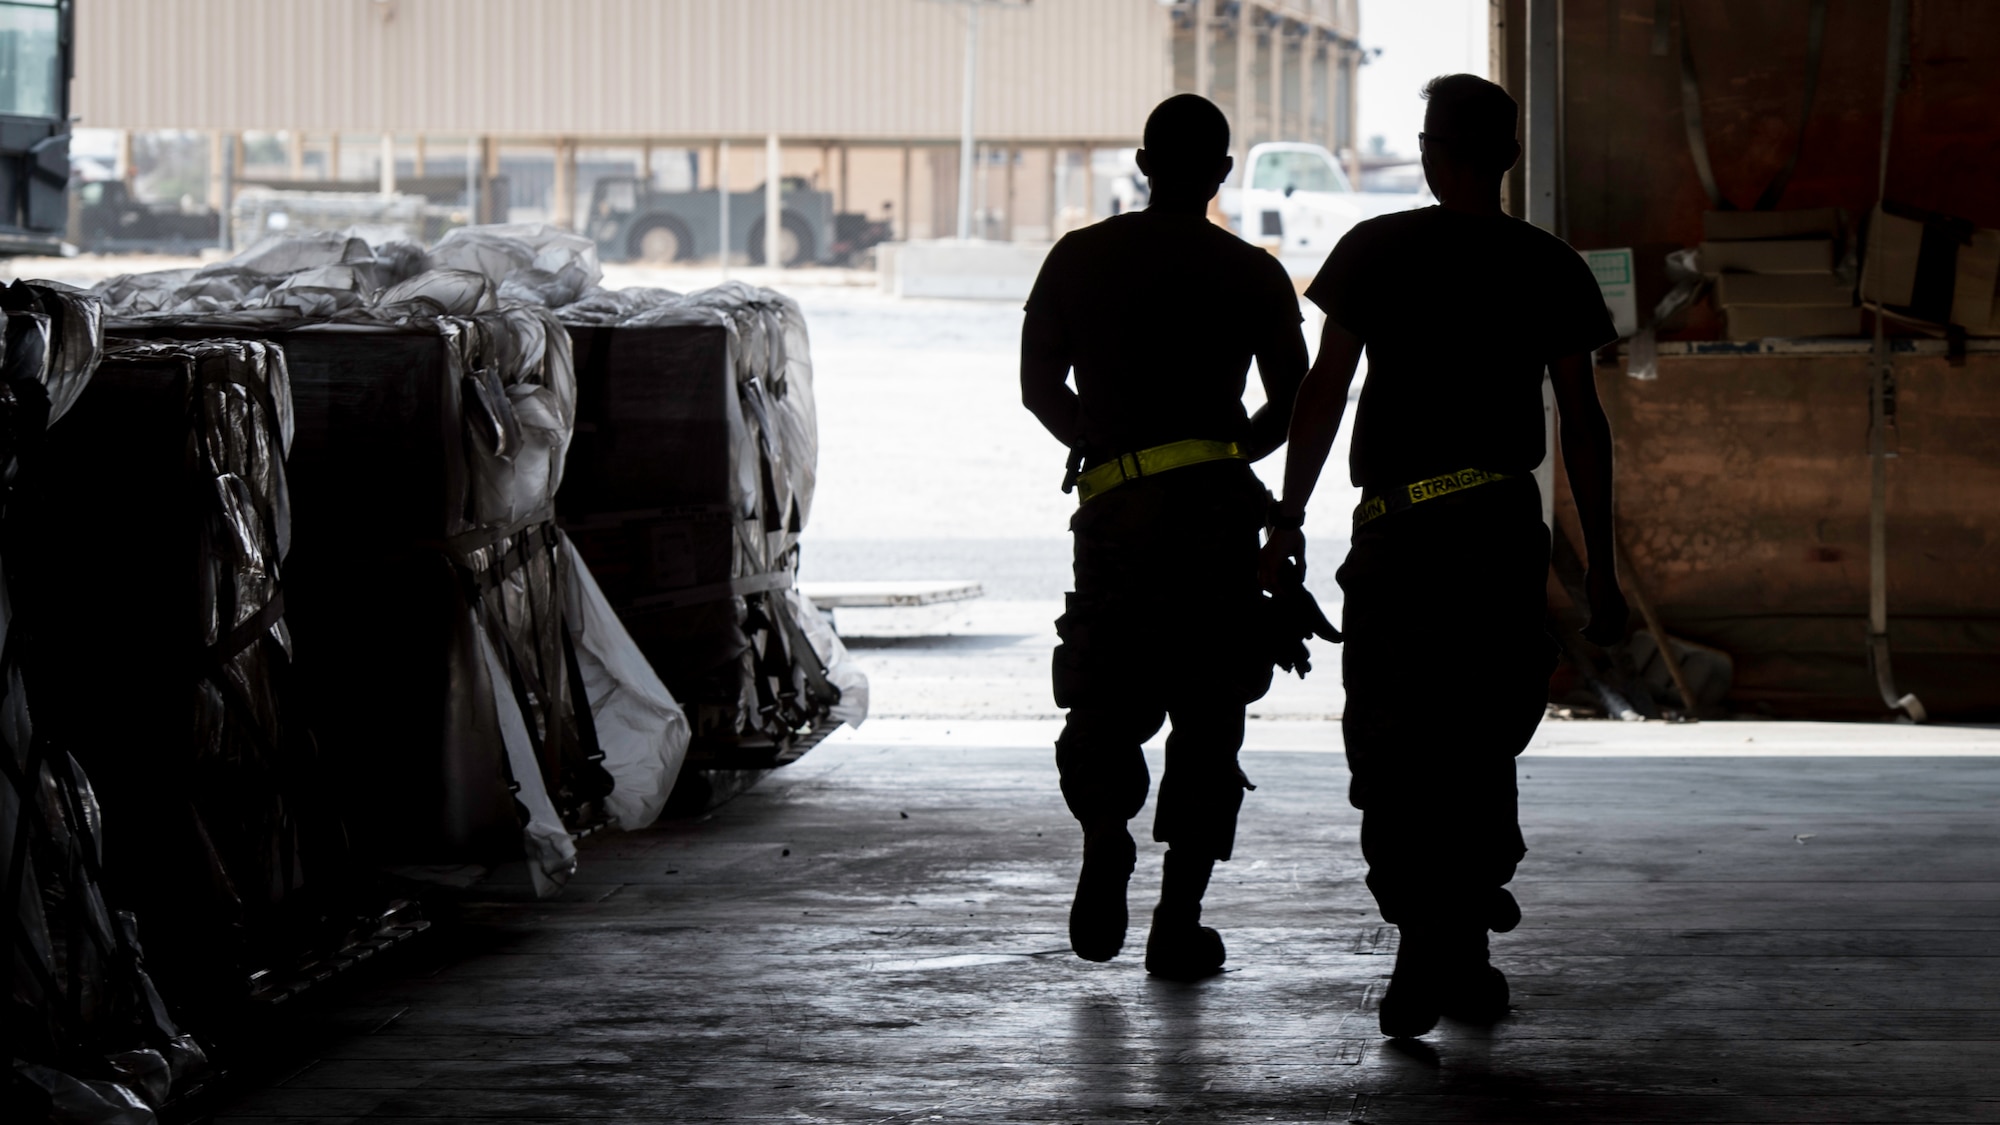 Staff Sgt. Samuel Johnson and Senior Airman Dalton McWilliams, 386th Expeditionary Logistics Readiness Squadron aerial port cargo processing representatives, walk by fully assembled, ready to transport pallets at Ali Al Salem Air Base, Kuwait, Oct. 17, 2019. Port Dawgs handled over 4,000 tons of inbound and outbound cargo in the month of September alone.